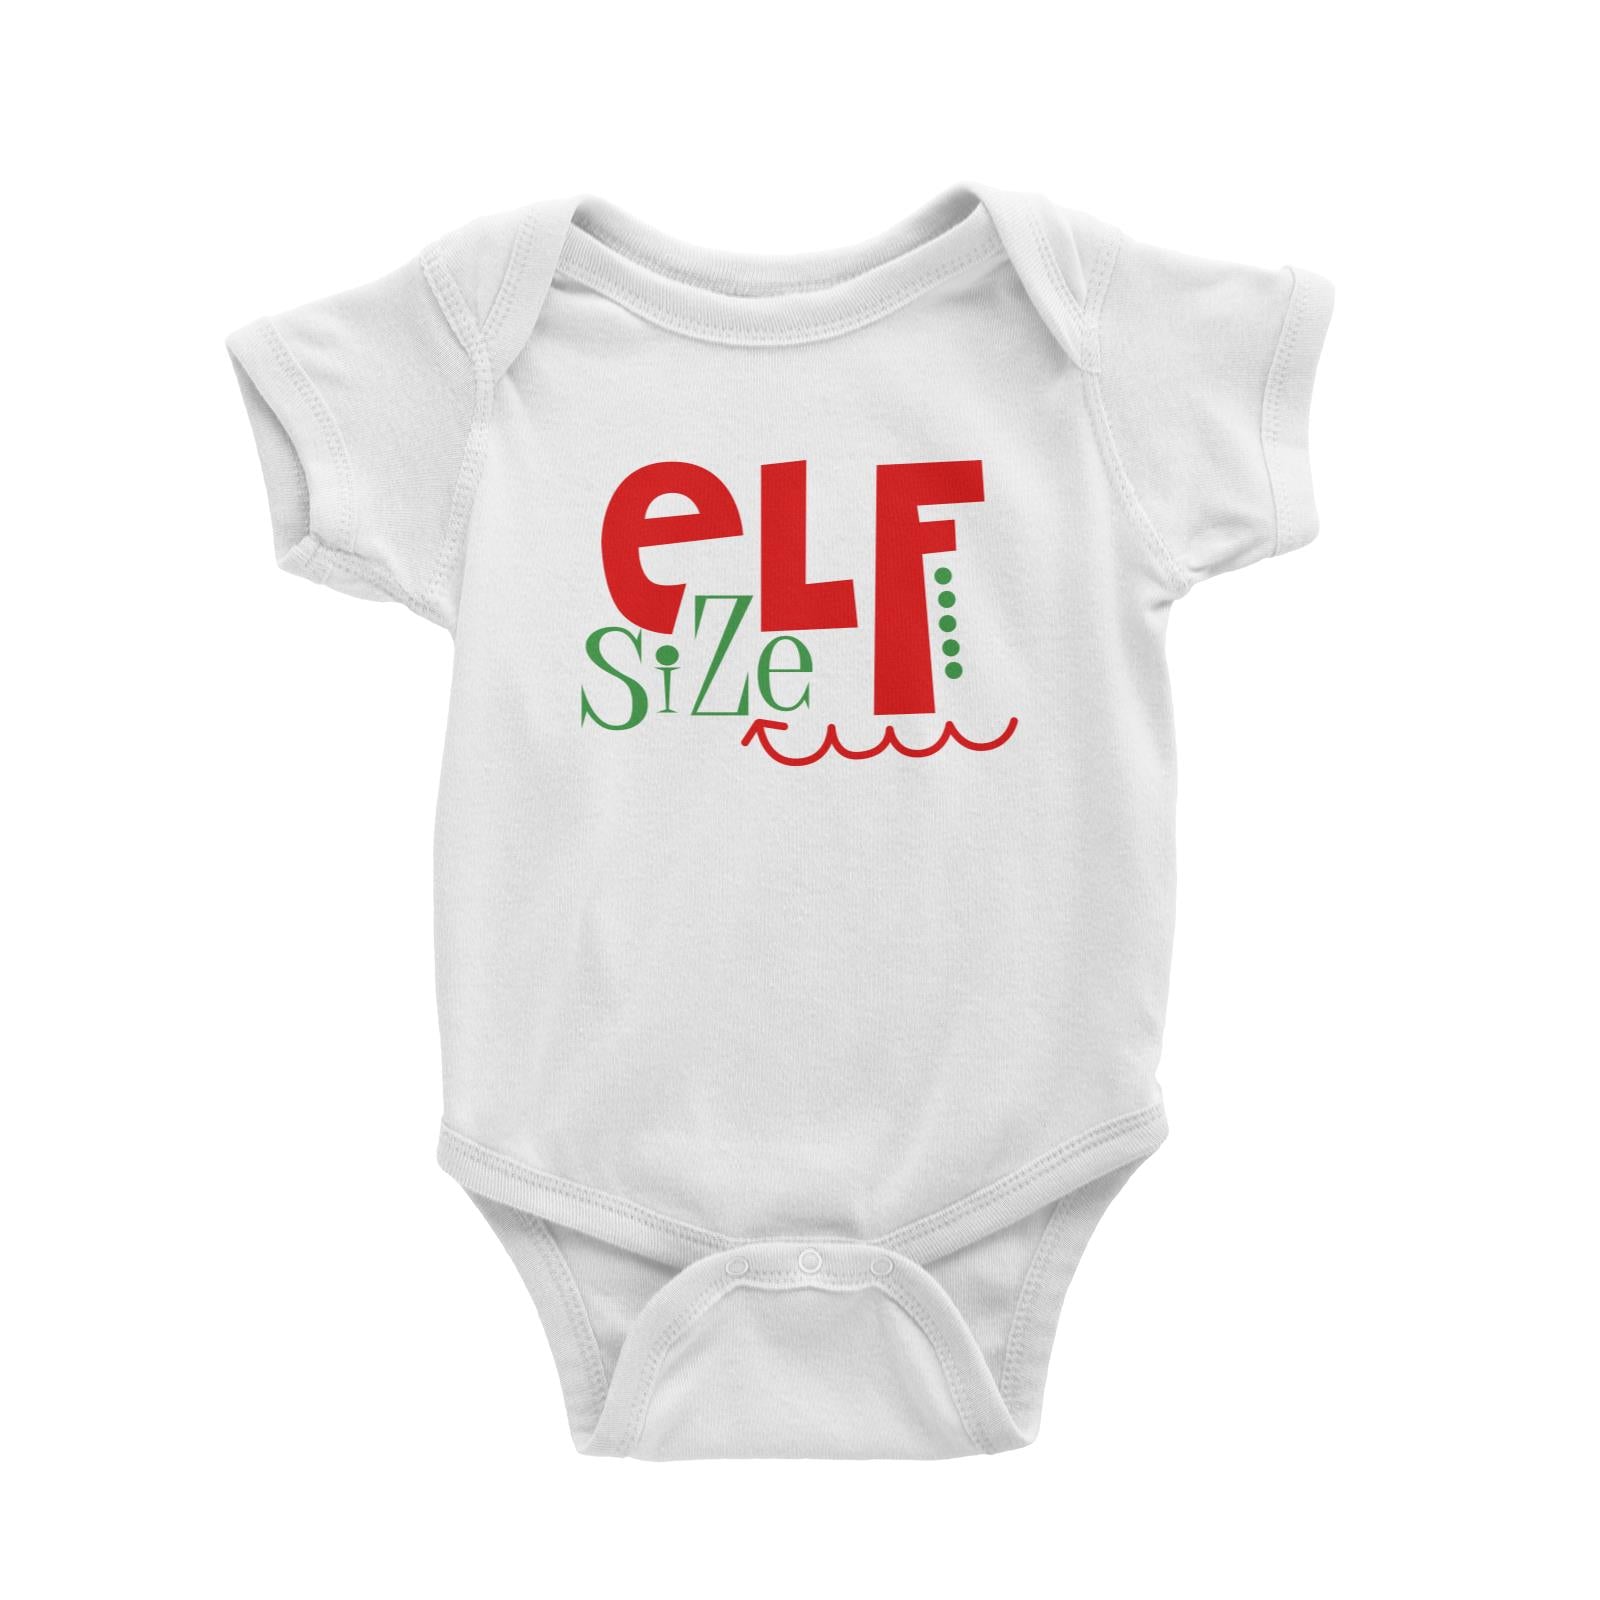 Elf Size Baby Romper Funny Christmas